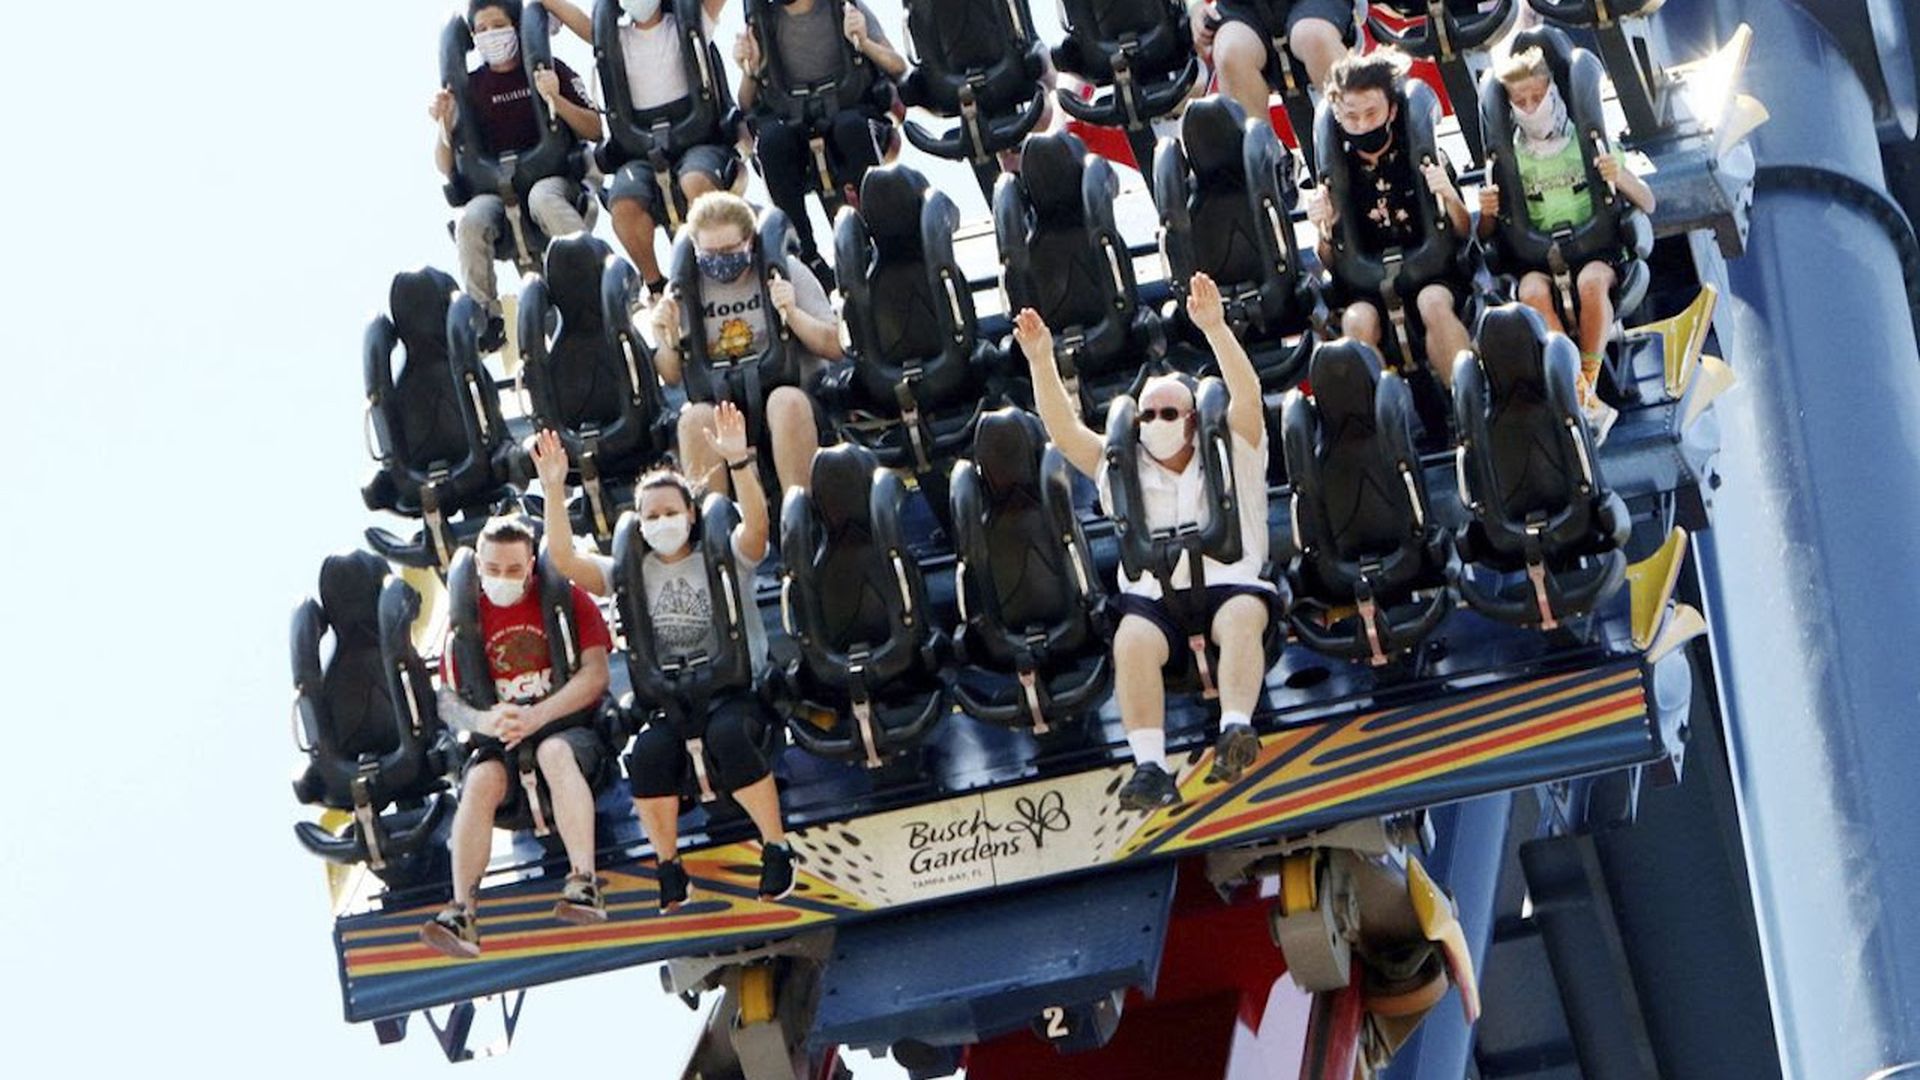 People wear masks and sit far apart from each other as they enjoy riding a roller coaster